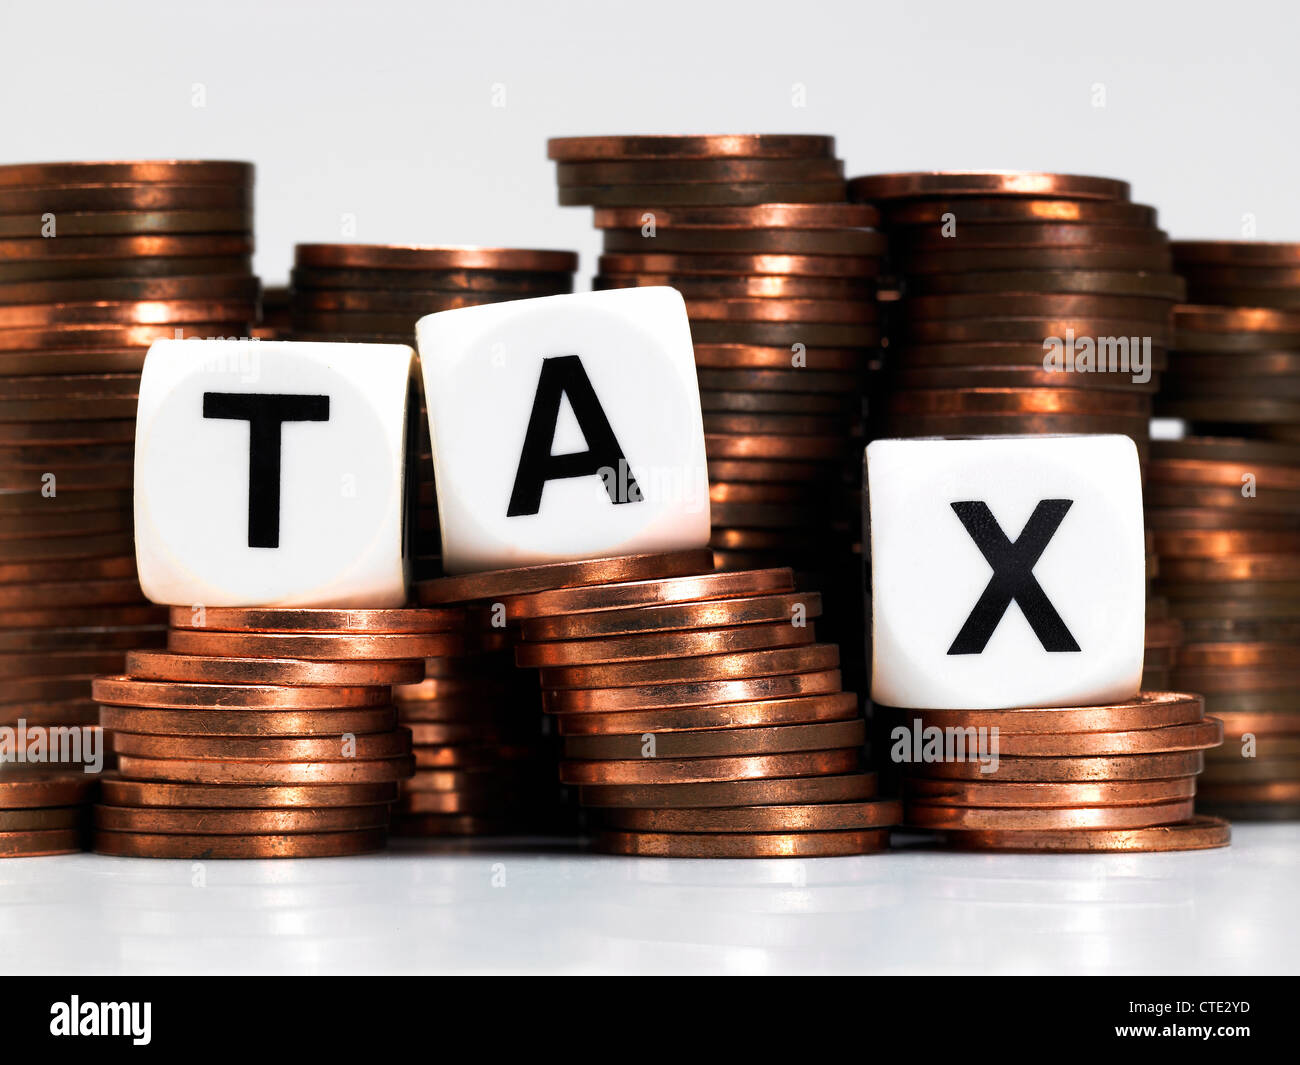 Dice balancing on a pile of coins, spelling out tax Stock Photo